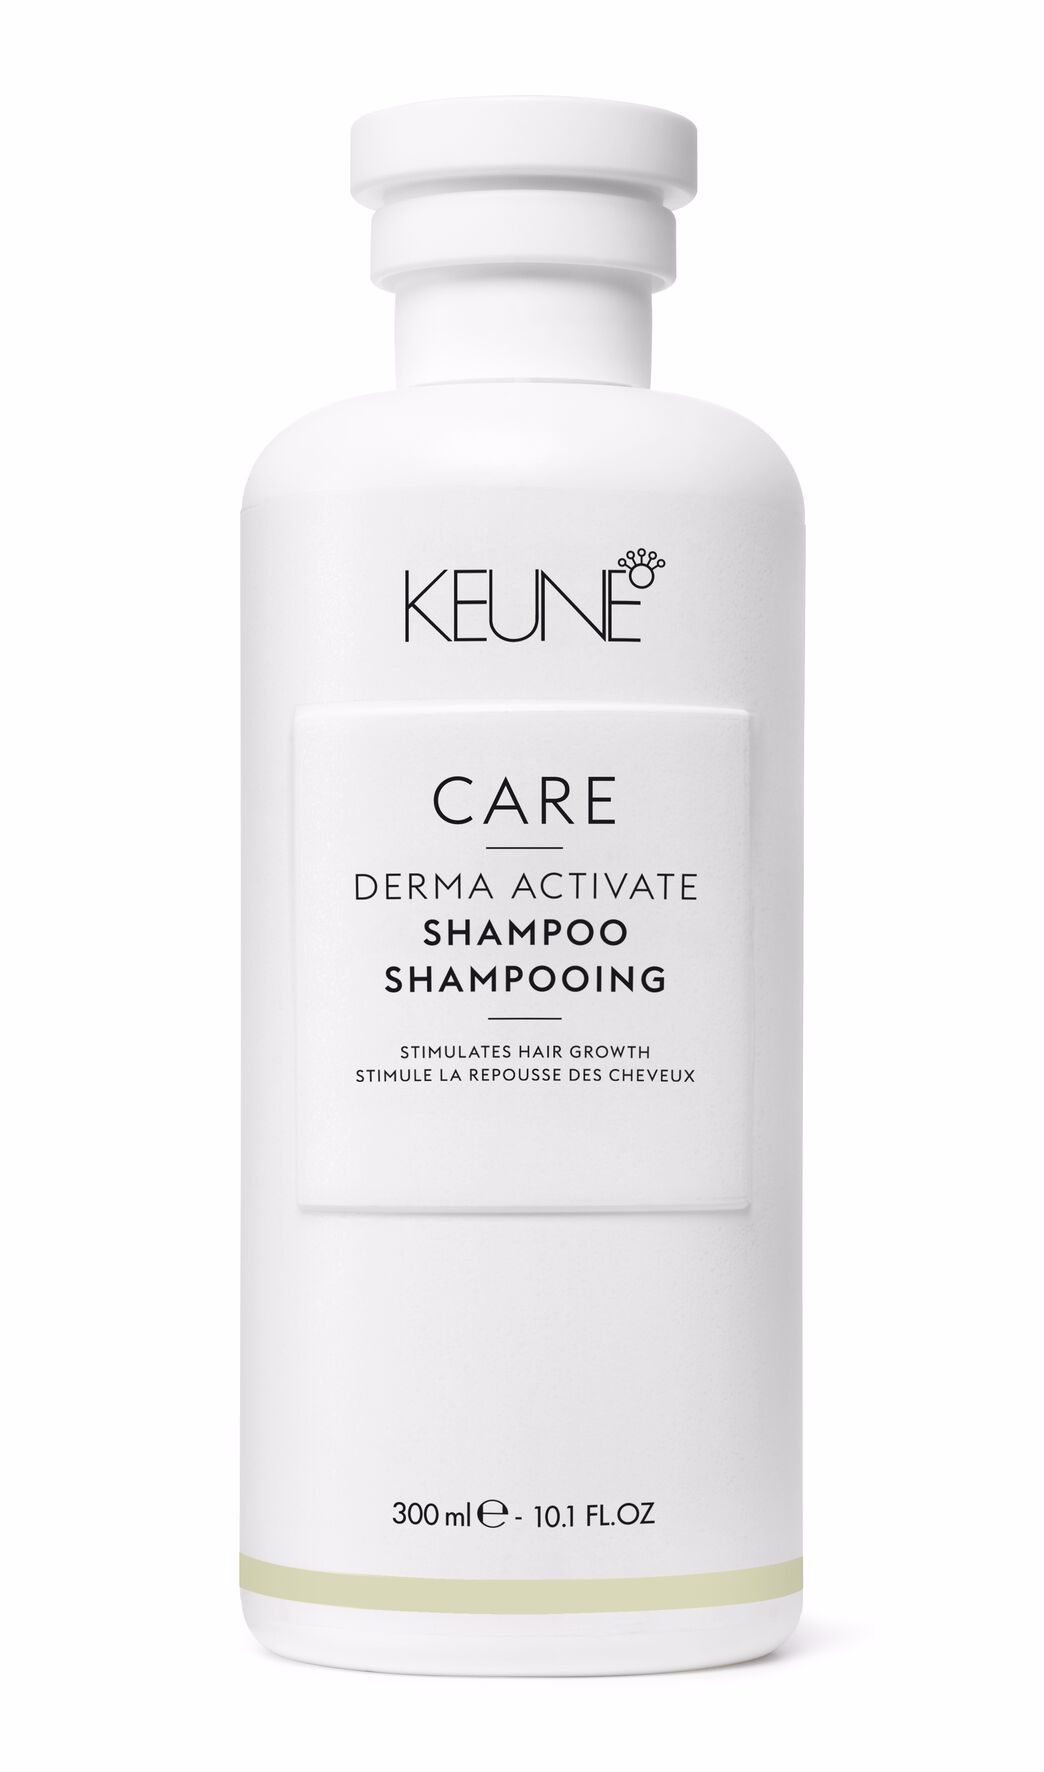 Hair loss? Strengthen your hair and conquer hair loss with Derma Activate Shampoo without silicones. It improves hair structure and supports hair growth. Keune.ch.